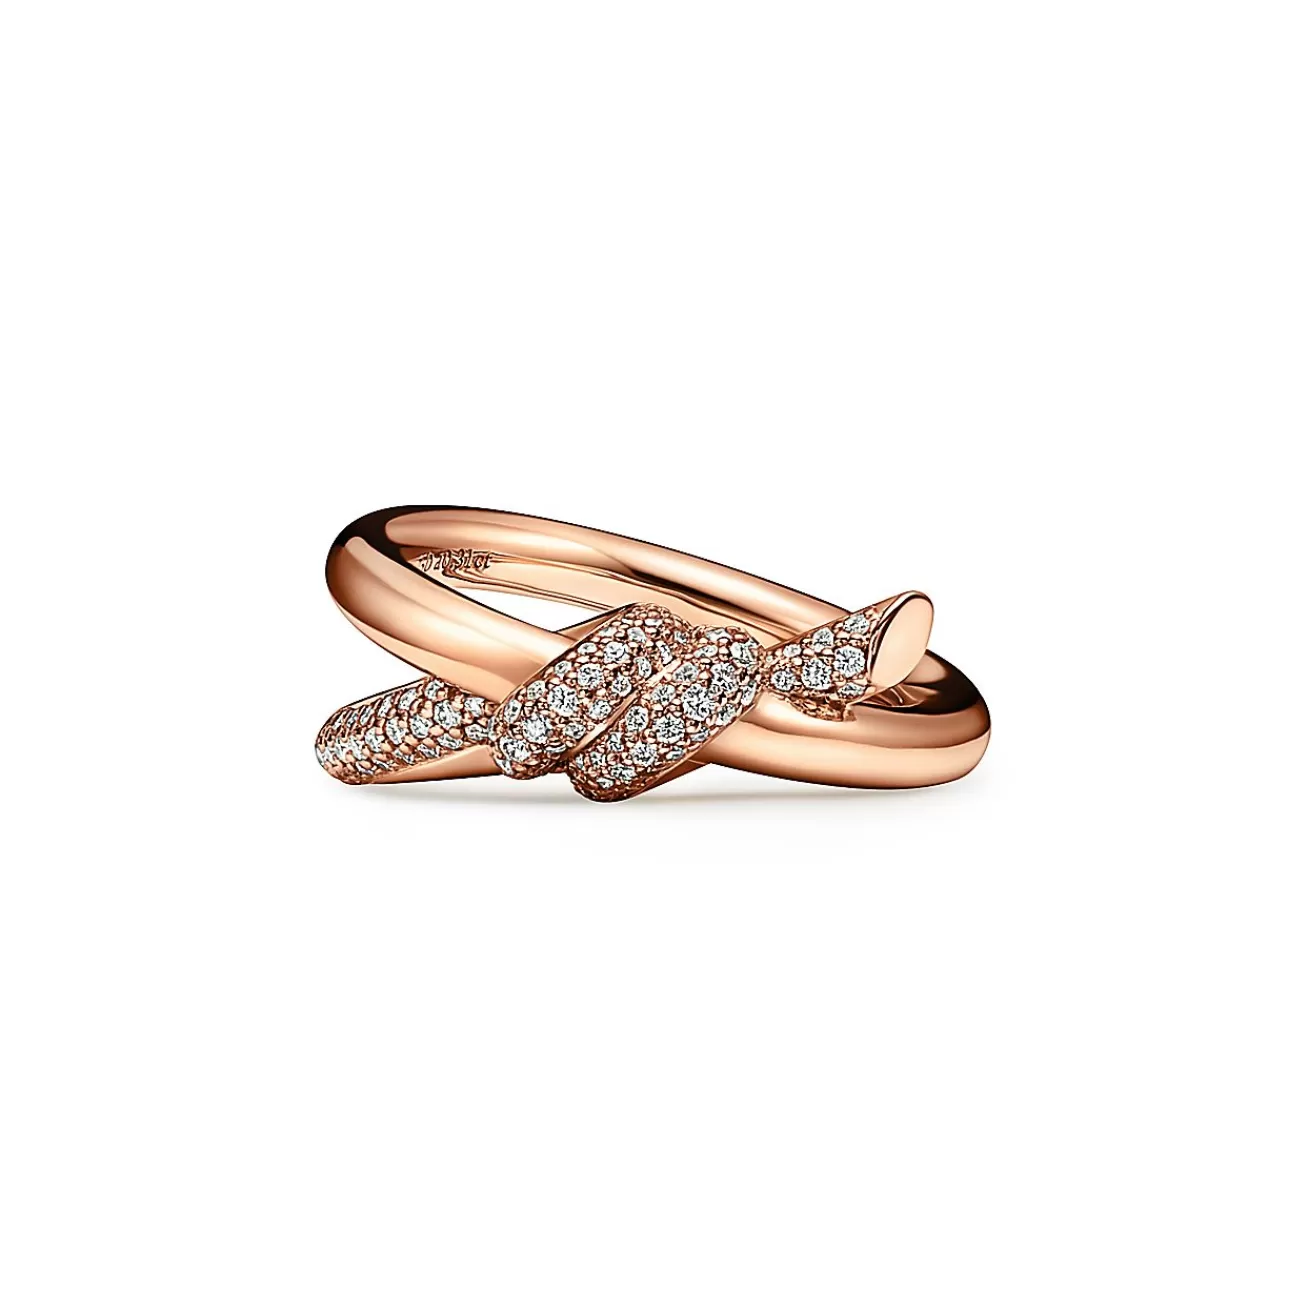 Tiffany & Co. Tiffany Knot Double Row Ring in Rose Gold with Diamonds | ^ Rings | Rose Gold Jewelry